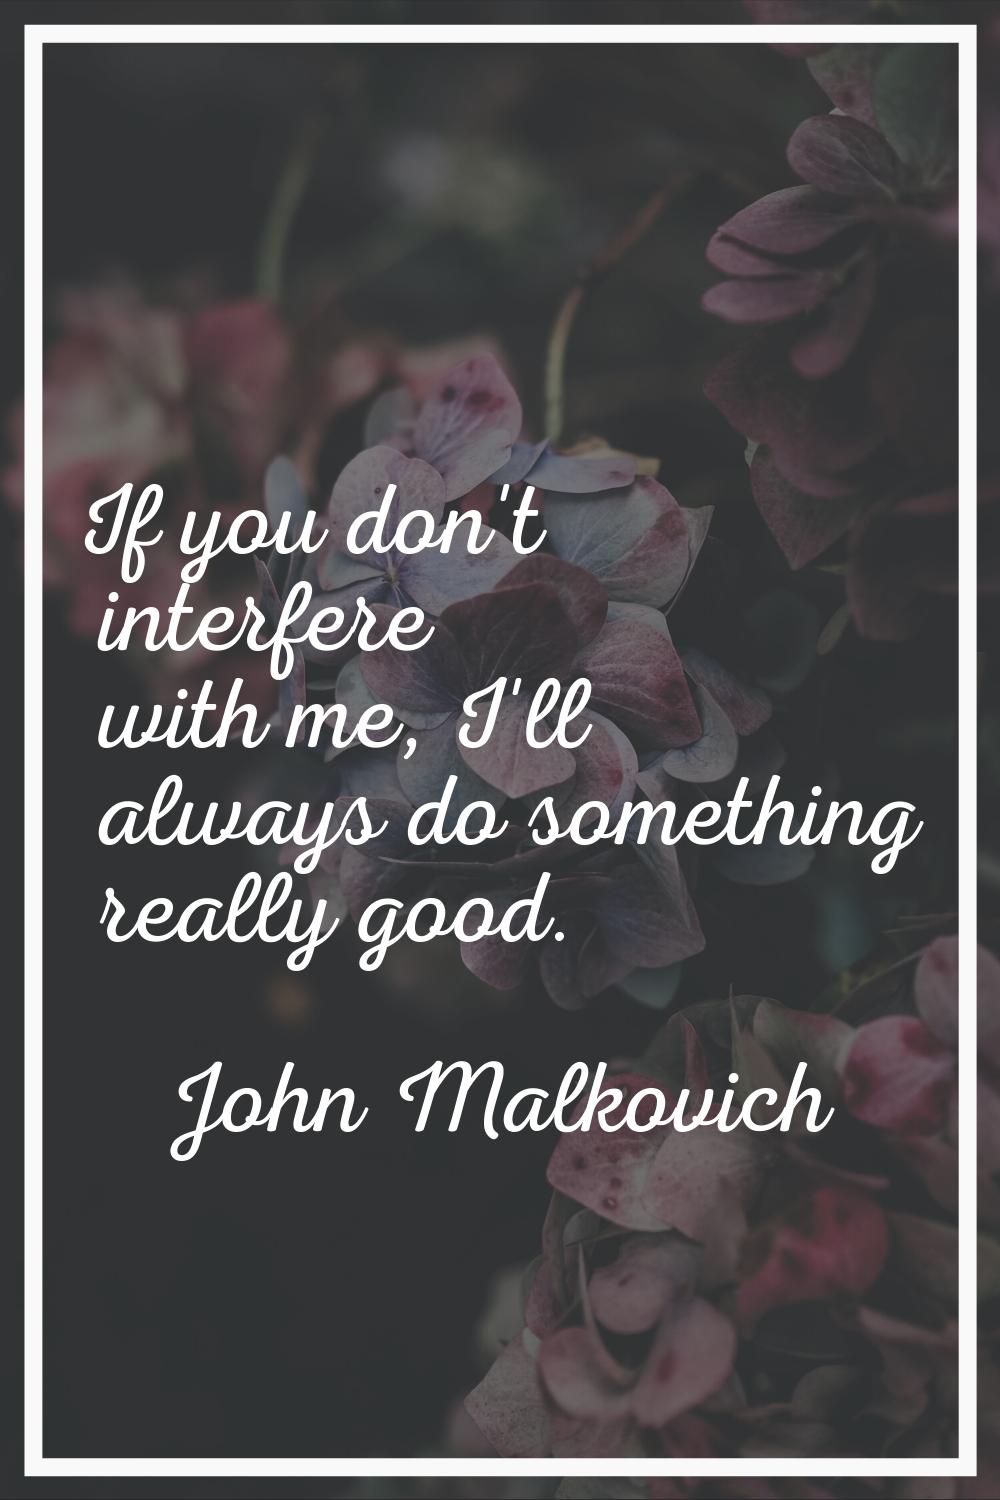 If you don't interfere with me, I'll always do something really good.